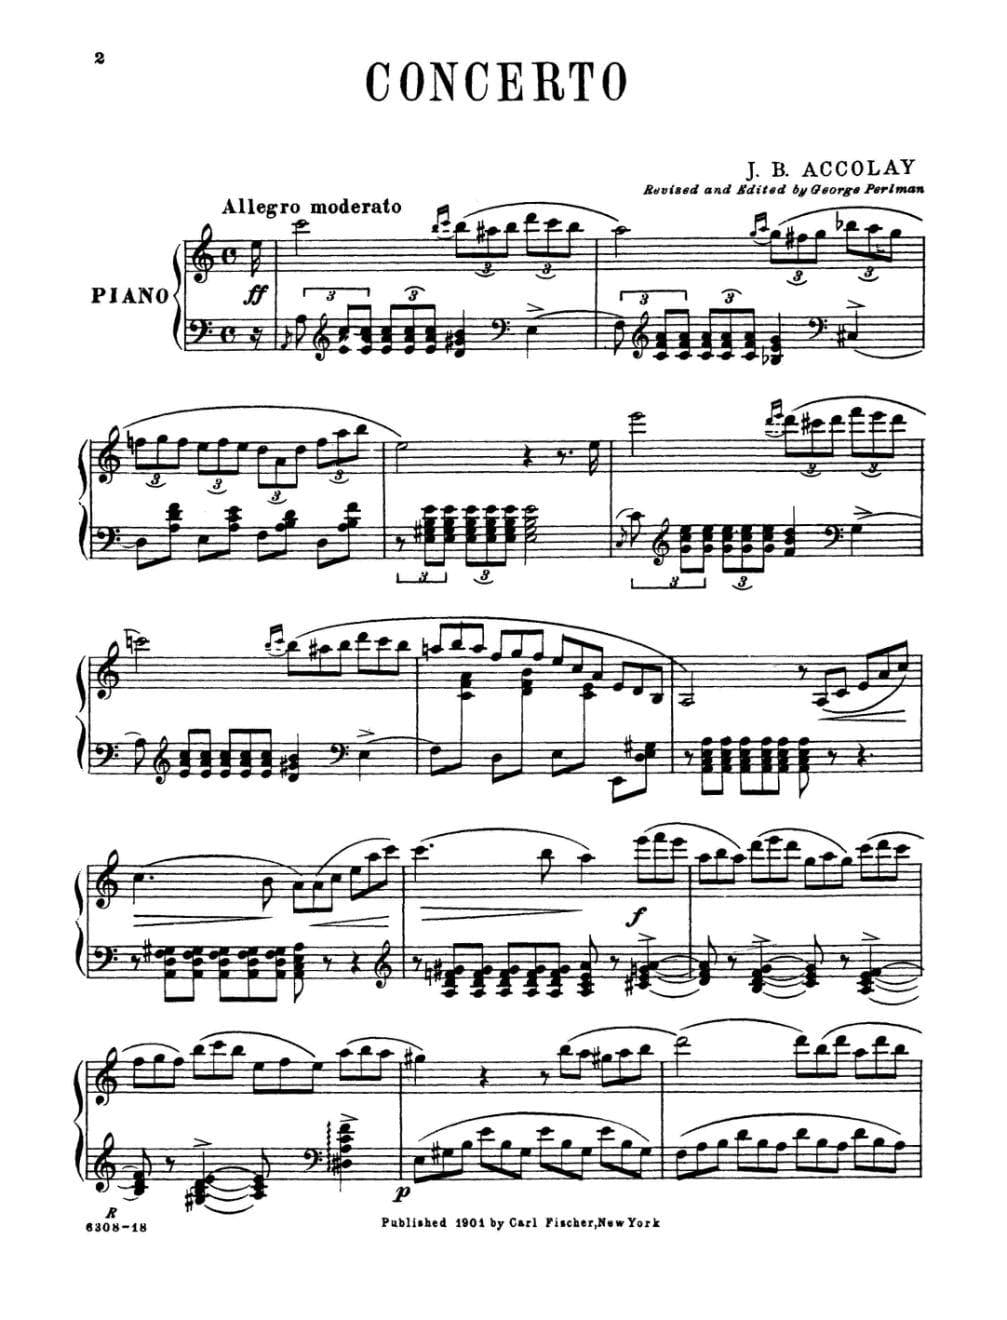 Accolay, JB - Concerto No 1 in a minor for Violin and Piano - Arranged by Perlman - Fischer Edition